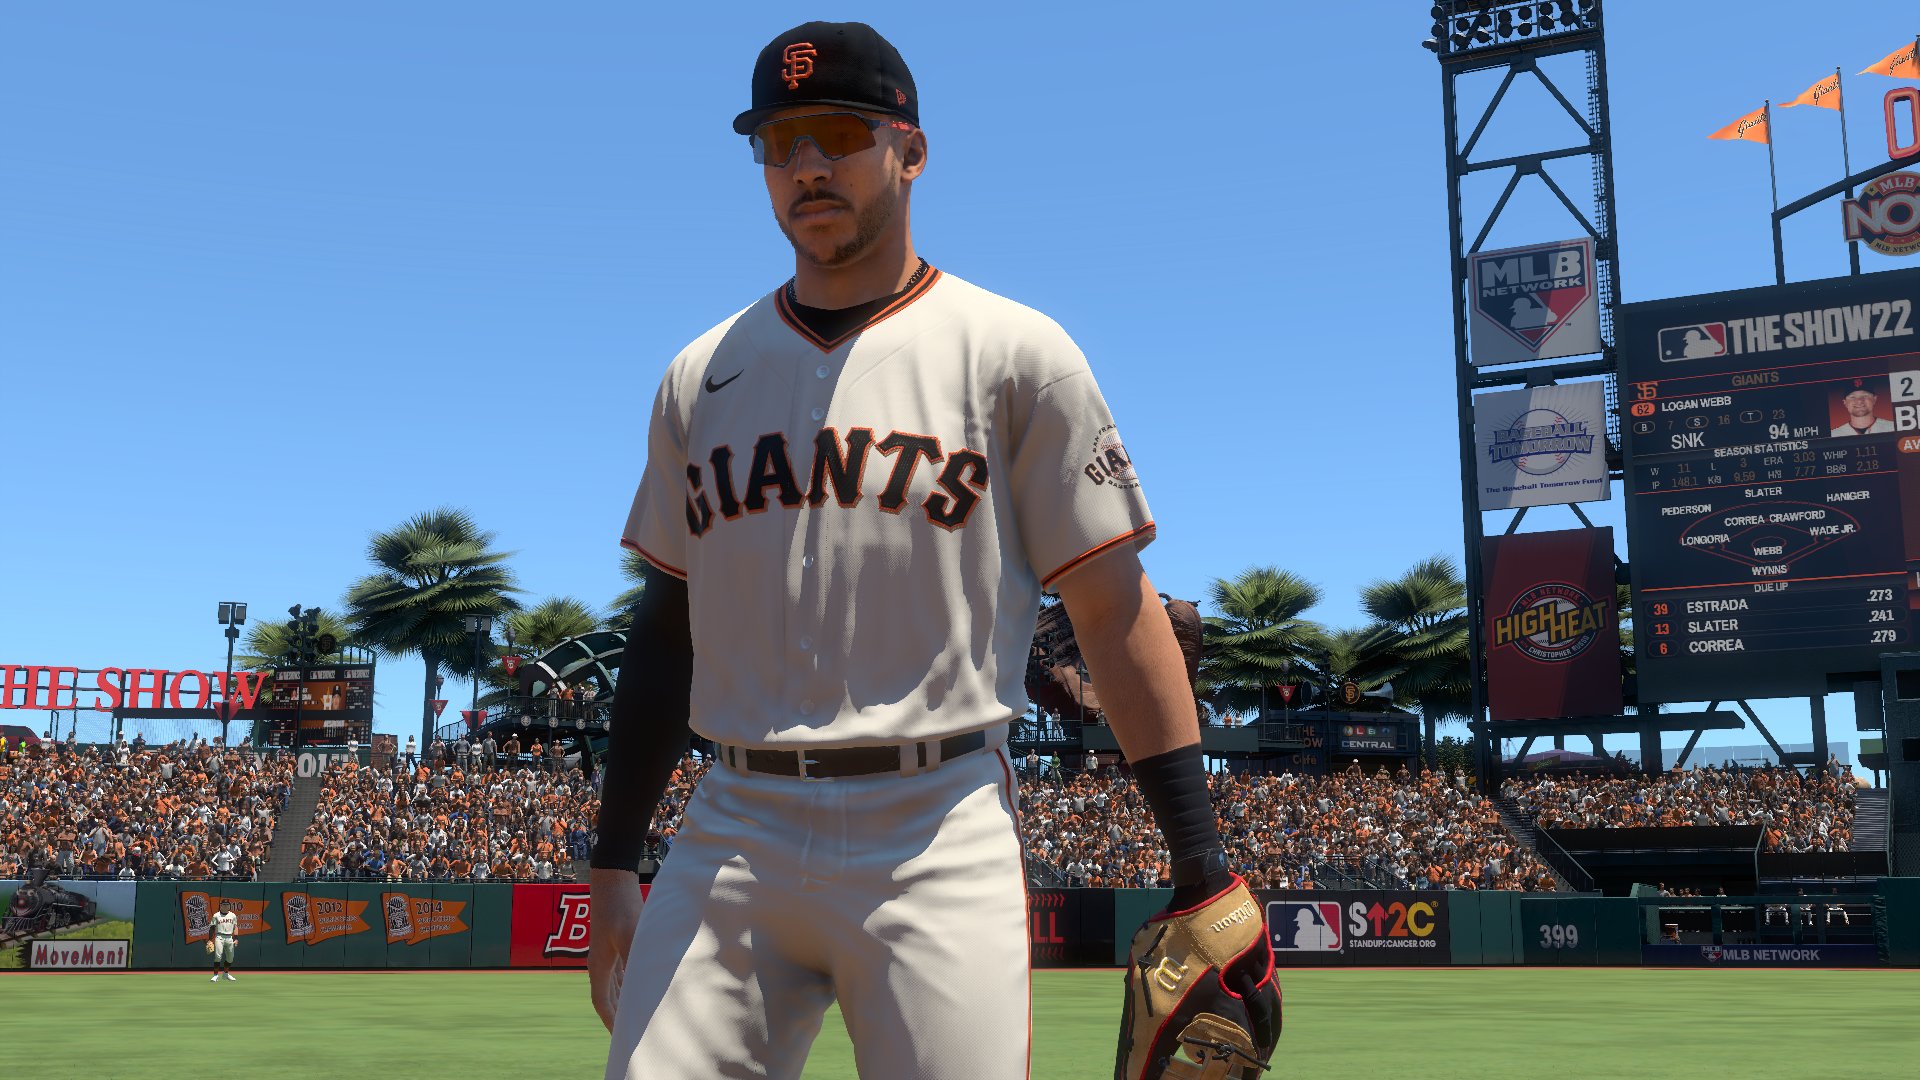 Share Your 2017 Diamond Dynasty Uniforms - Page 3 - Operation Sports Forums